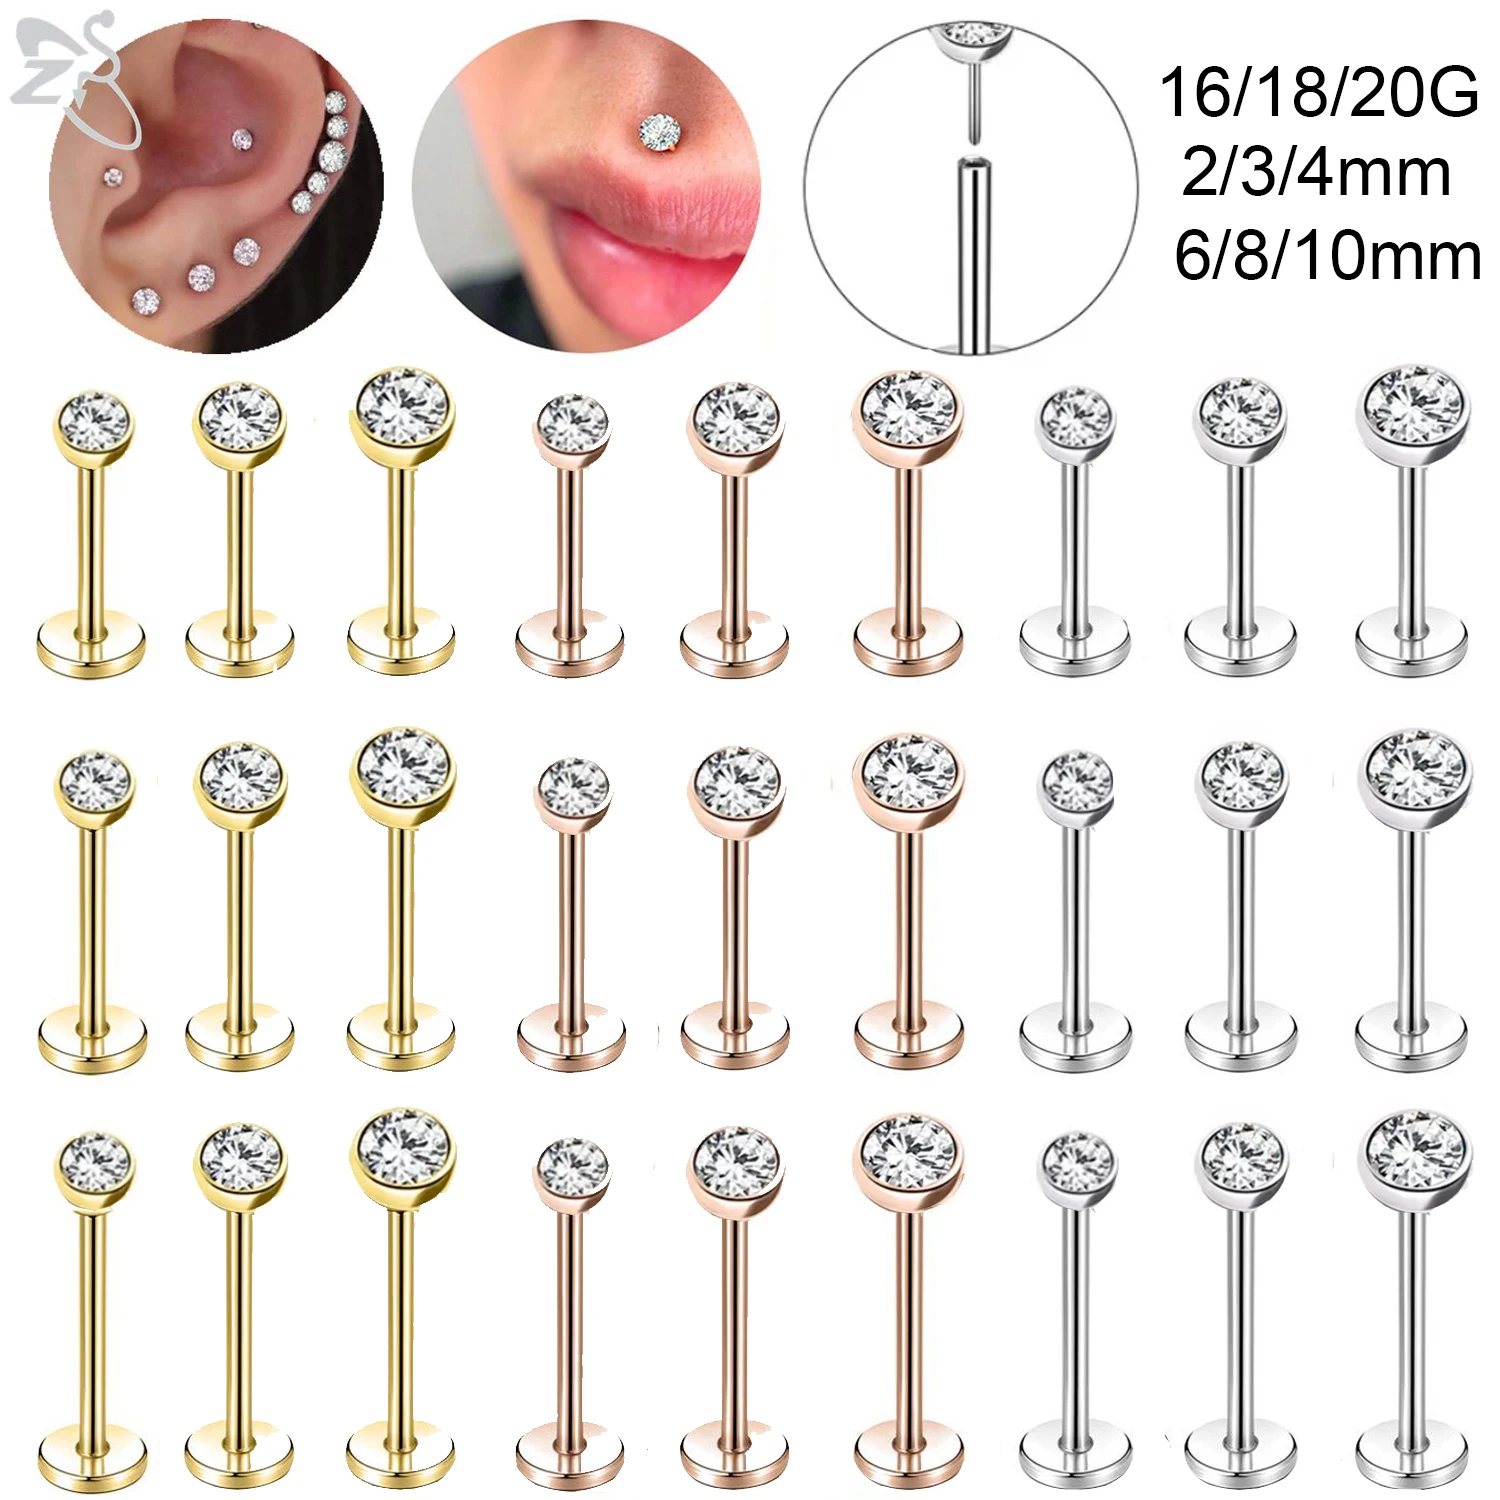 

ZS 1PC 16G/18G/20G Crystal Lip Labret Piercing Stainless Steel Lip Studs Plug in Style Cartilage Earring Daith Helix Piecings